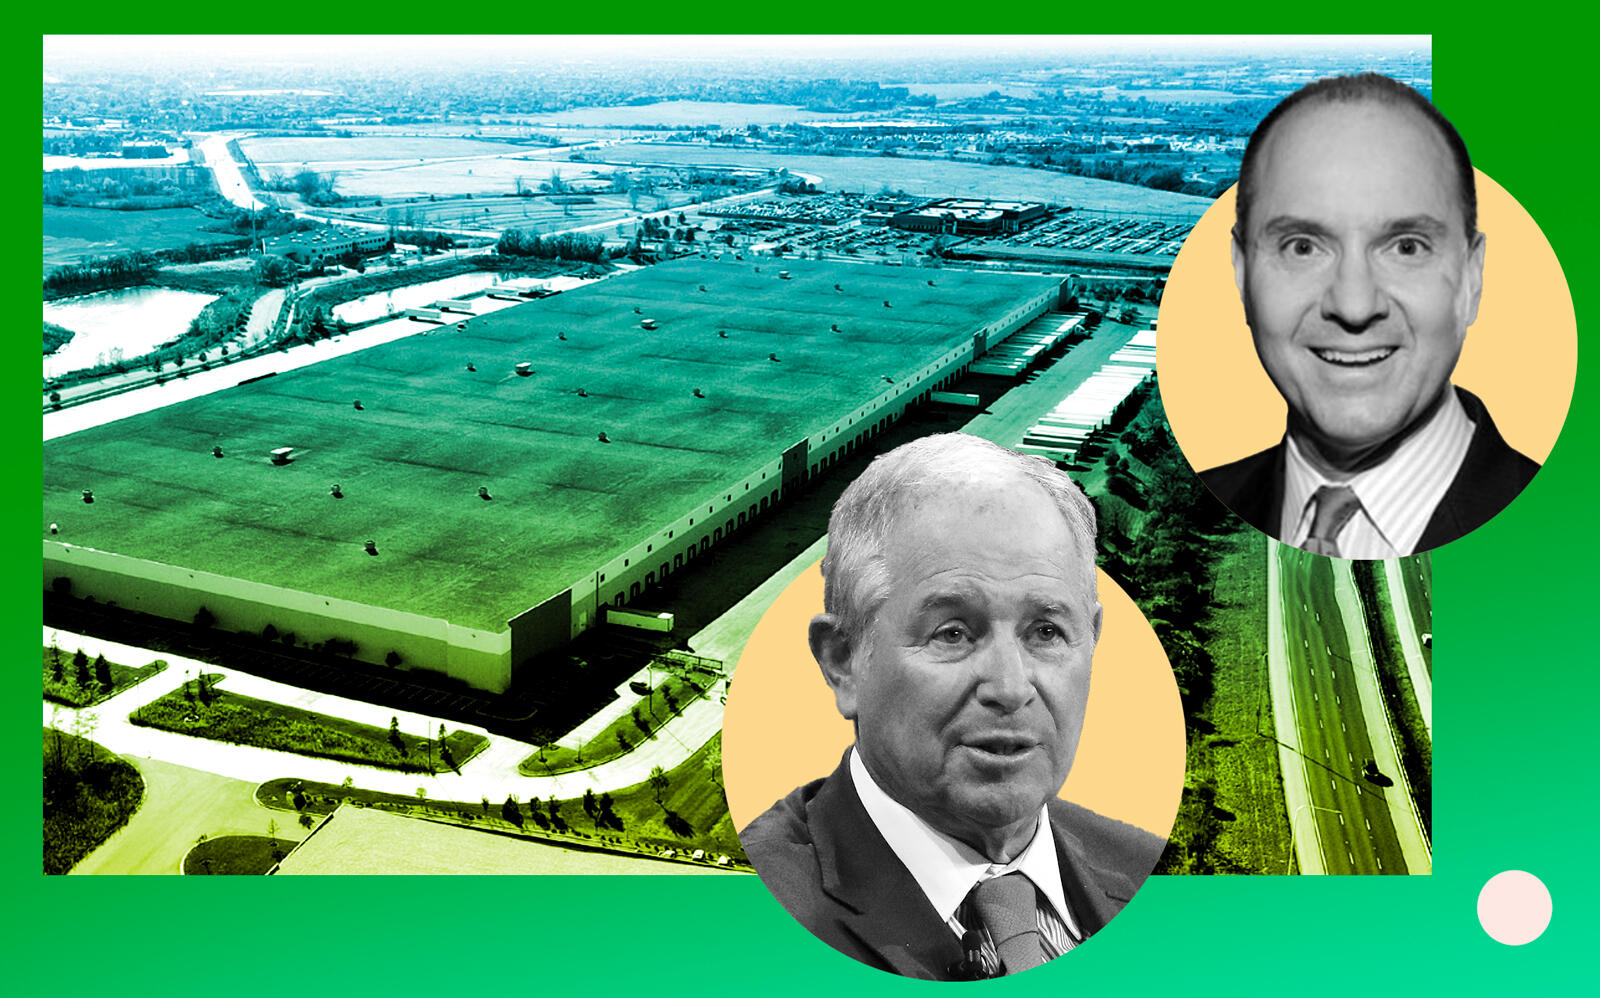 Tinley Park Corporate Center at 18801 Oak Park Avenue, Blackstone CEO Stephen Schwarzman and Exeter Property Group CEO Edward Fitzgerald (Lee & Associates, Getty, Ehlers-Danlos Society)